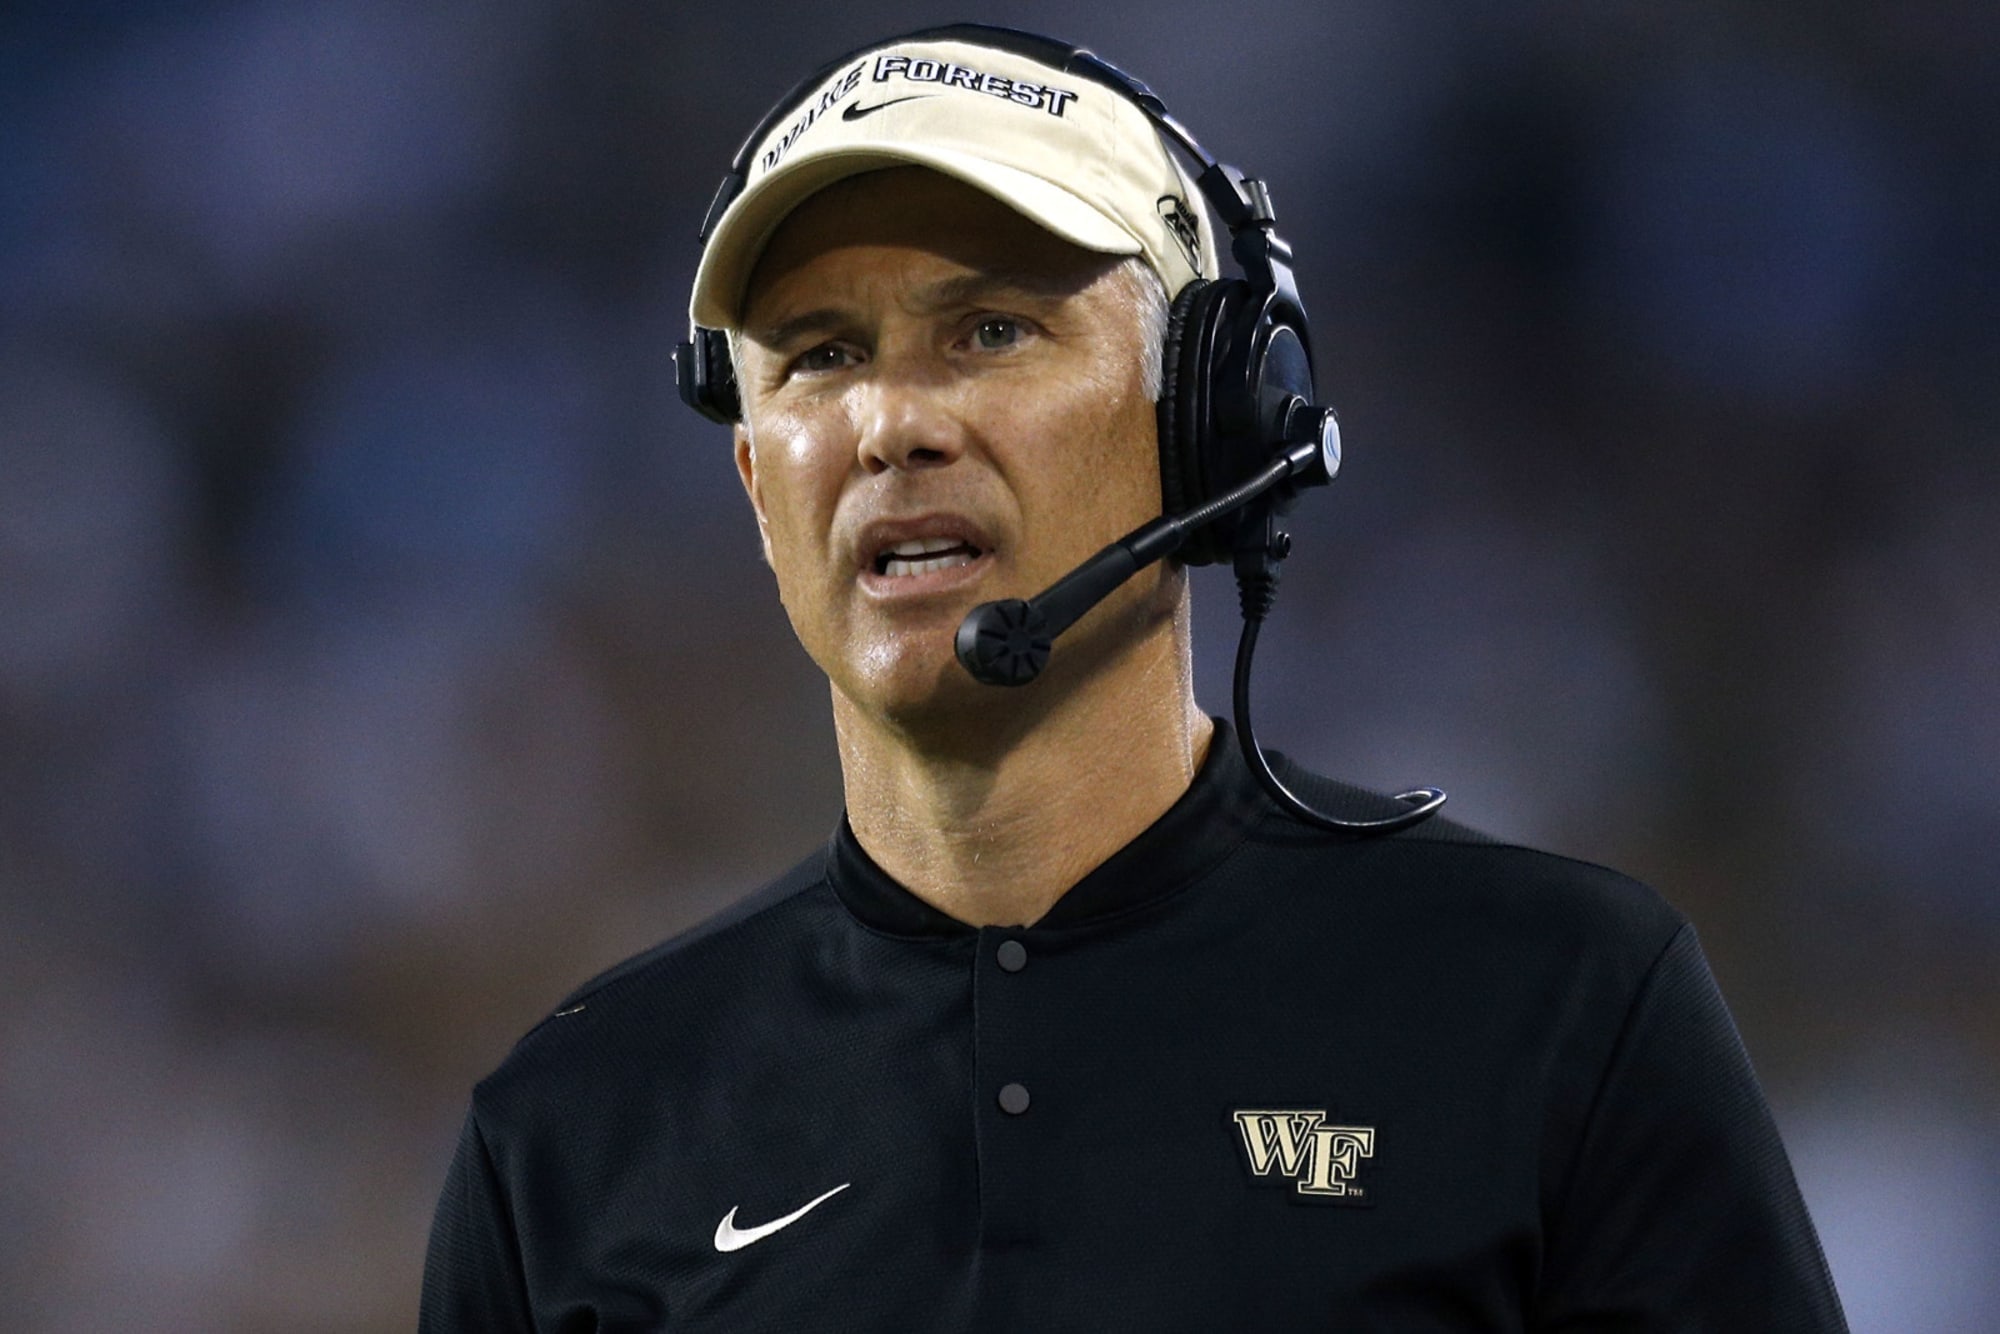 Mizzou Football should try to steal Dave Clawson from Wake Forest